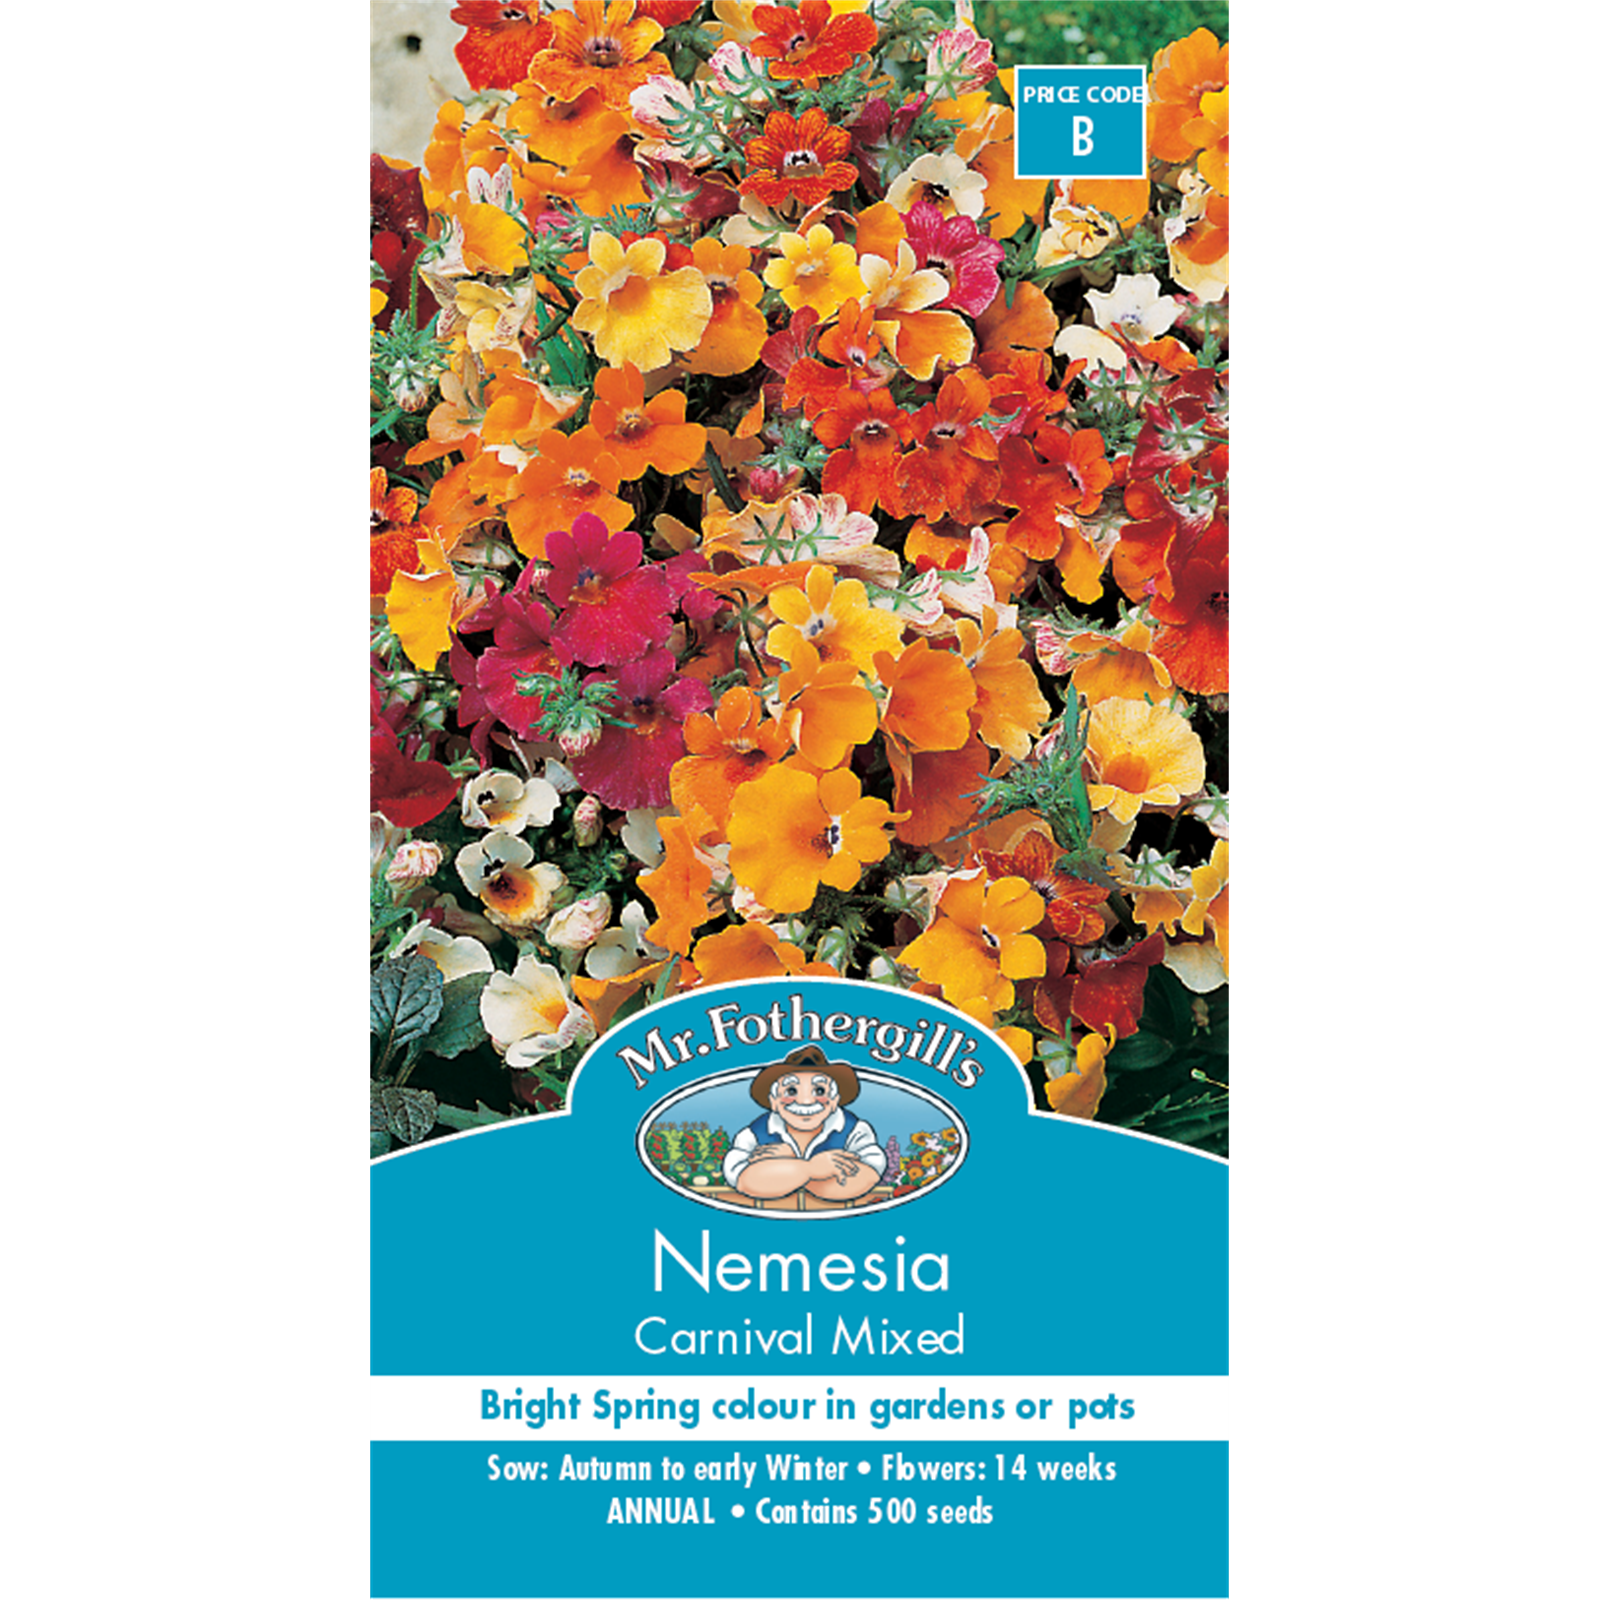 Mr Fothergill's Nemesia Carnival Mixed Flower Seed